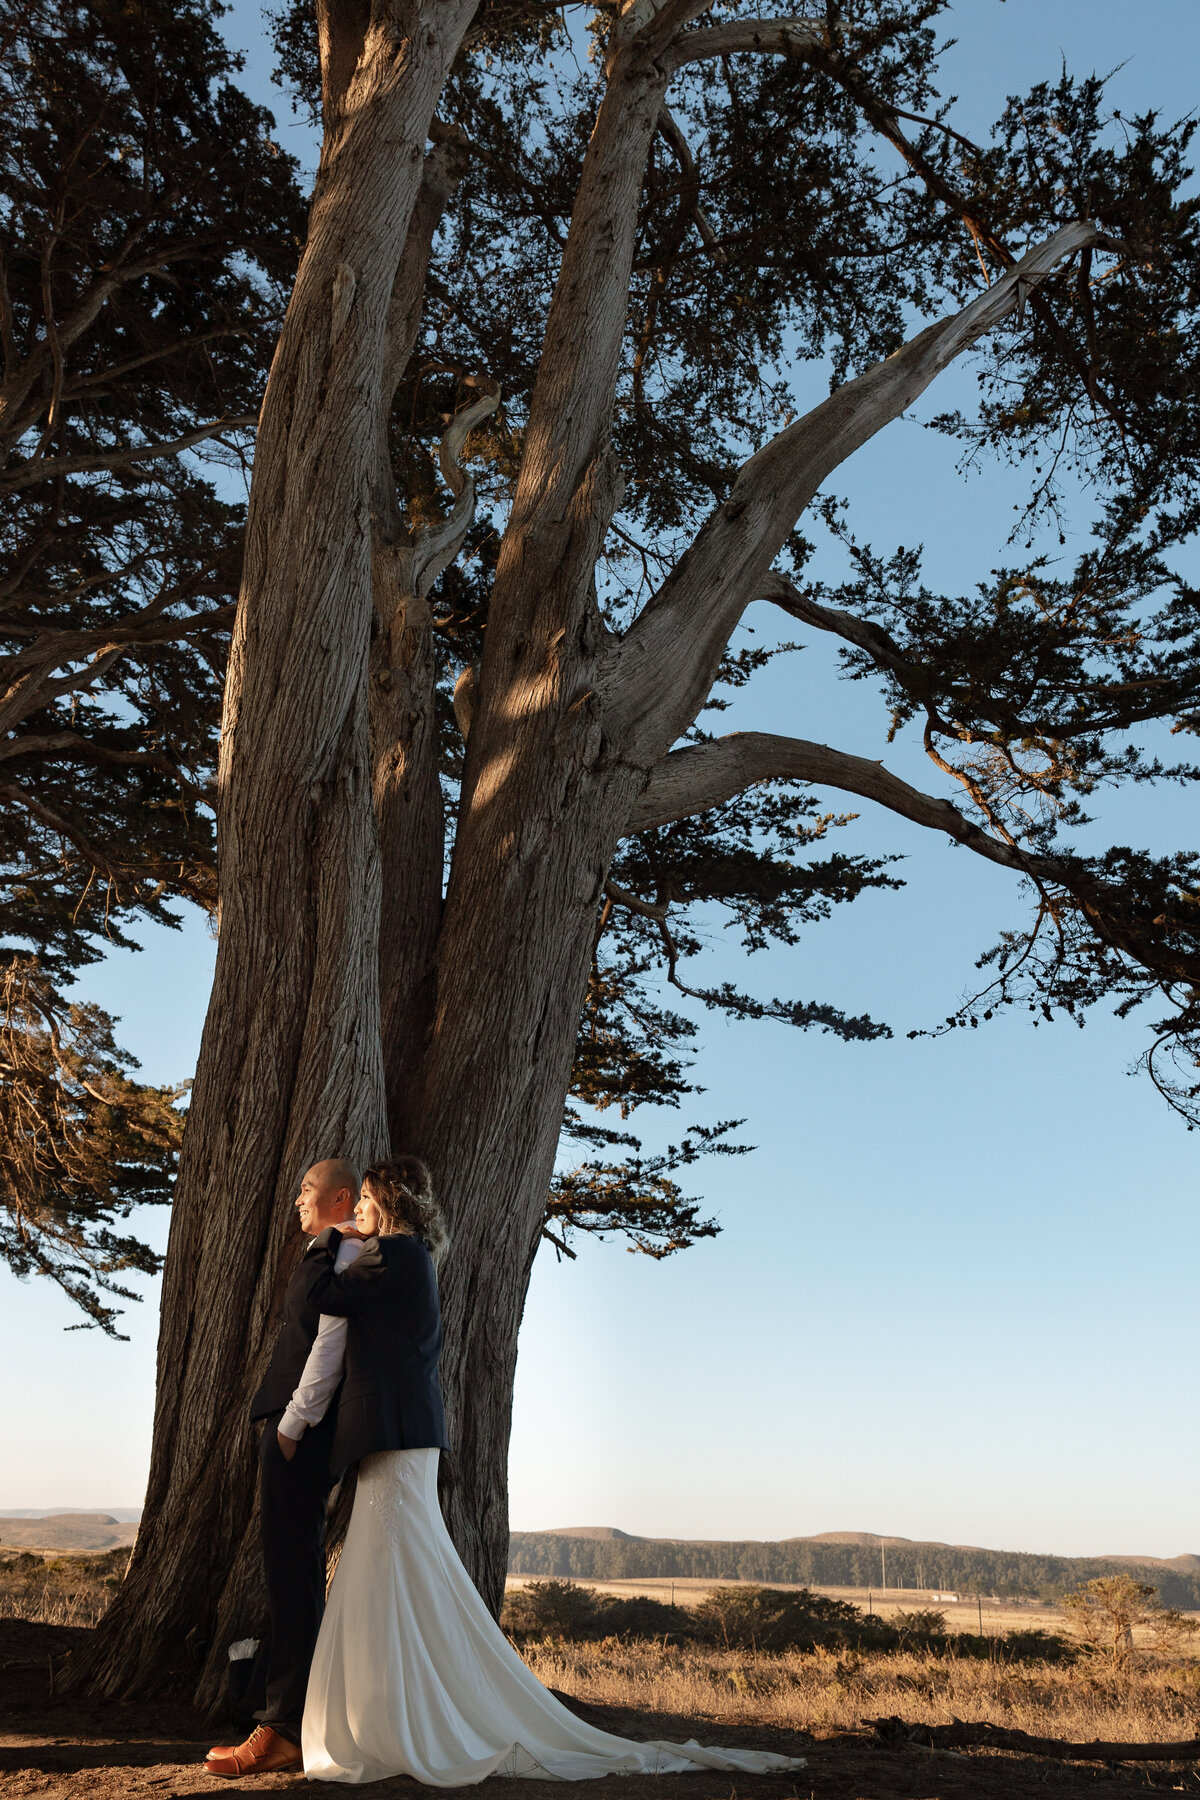 Newly married couple embraces next to a eucalyptus tree in Pt Reyes